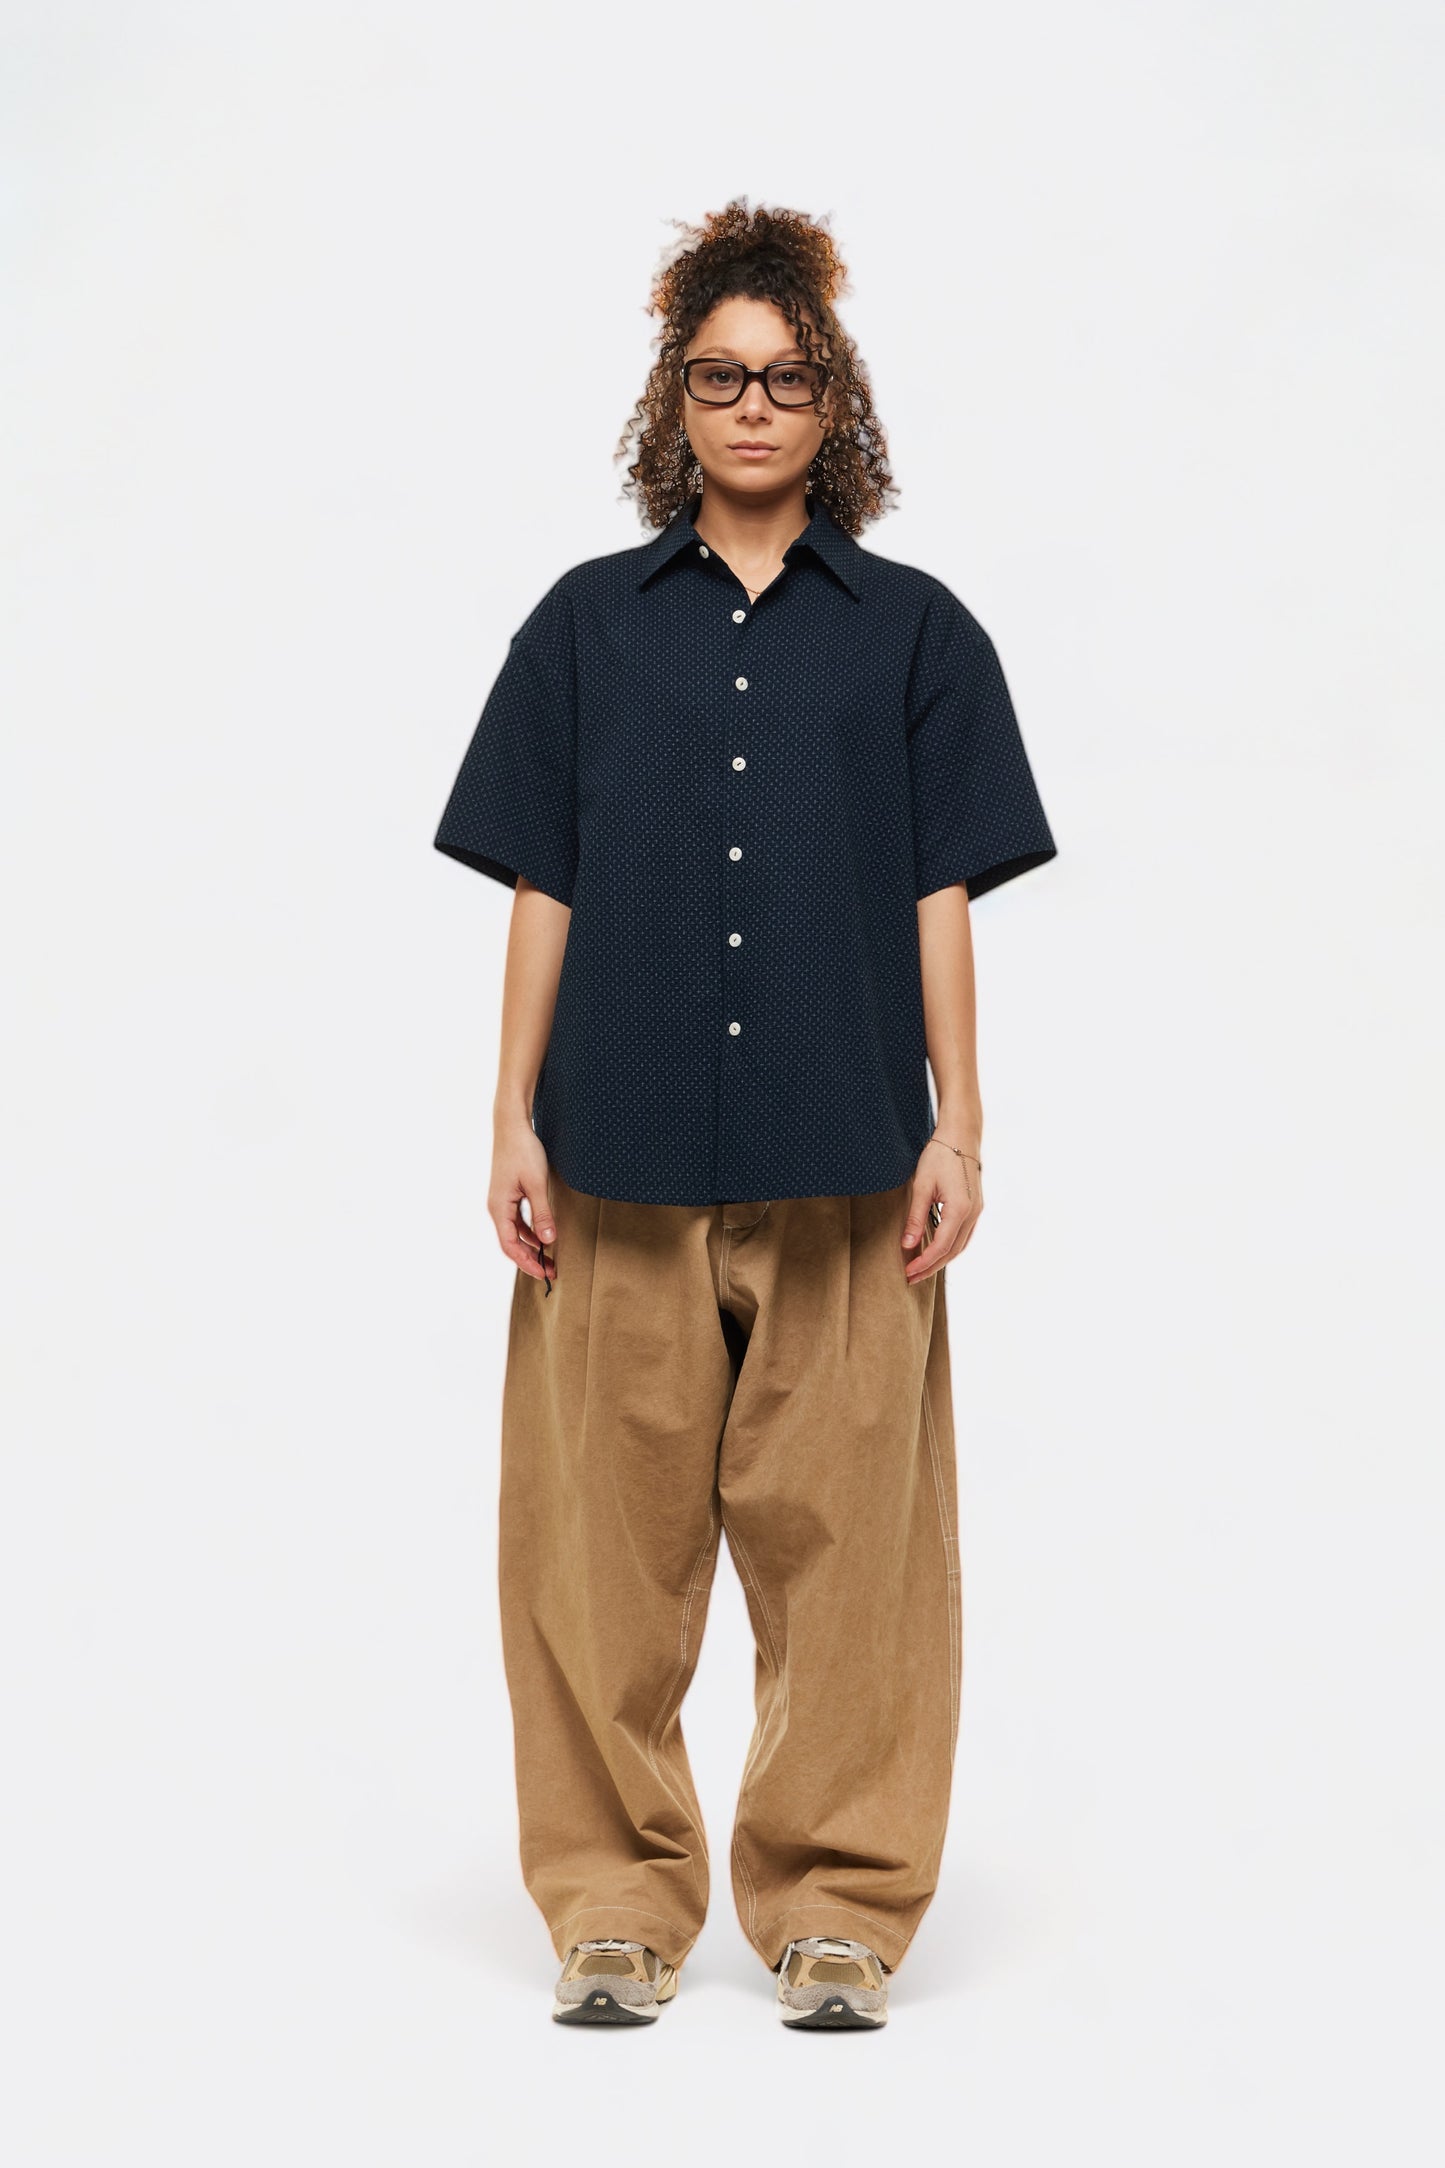 Merely Made - Merely Hmong Workers Pants (Light Tan)